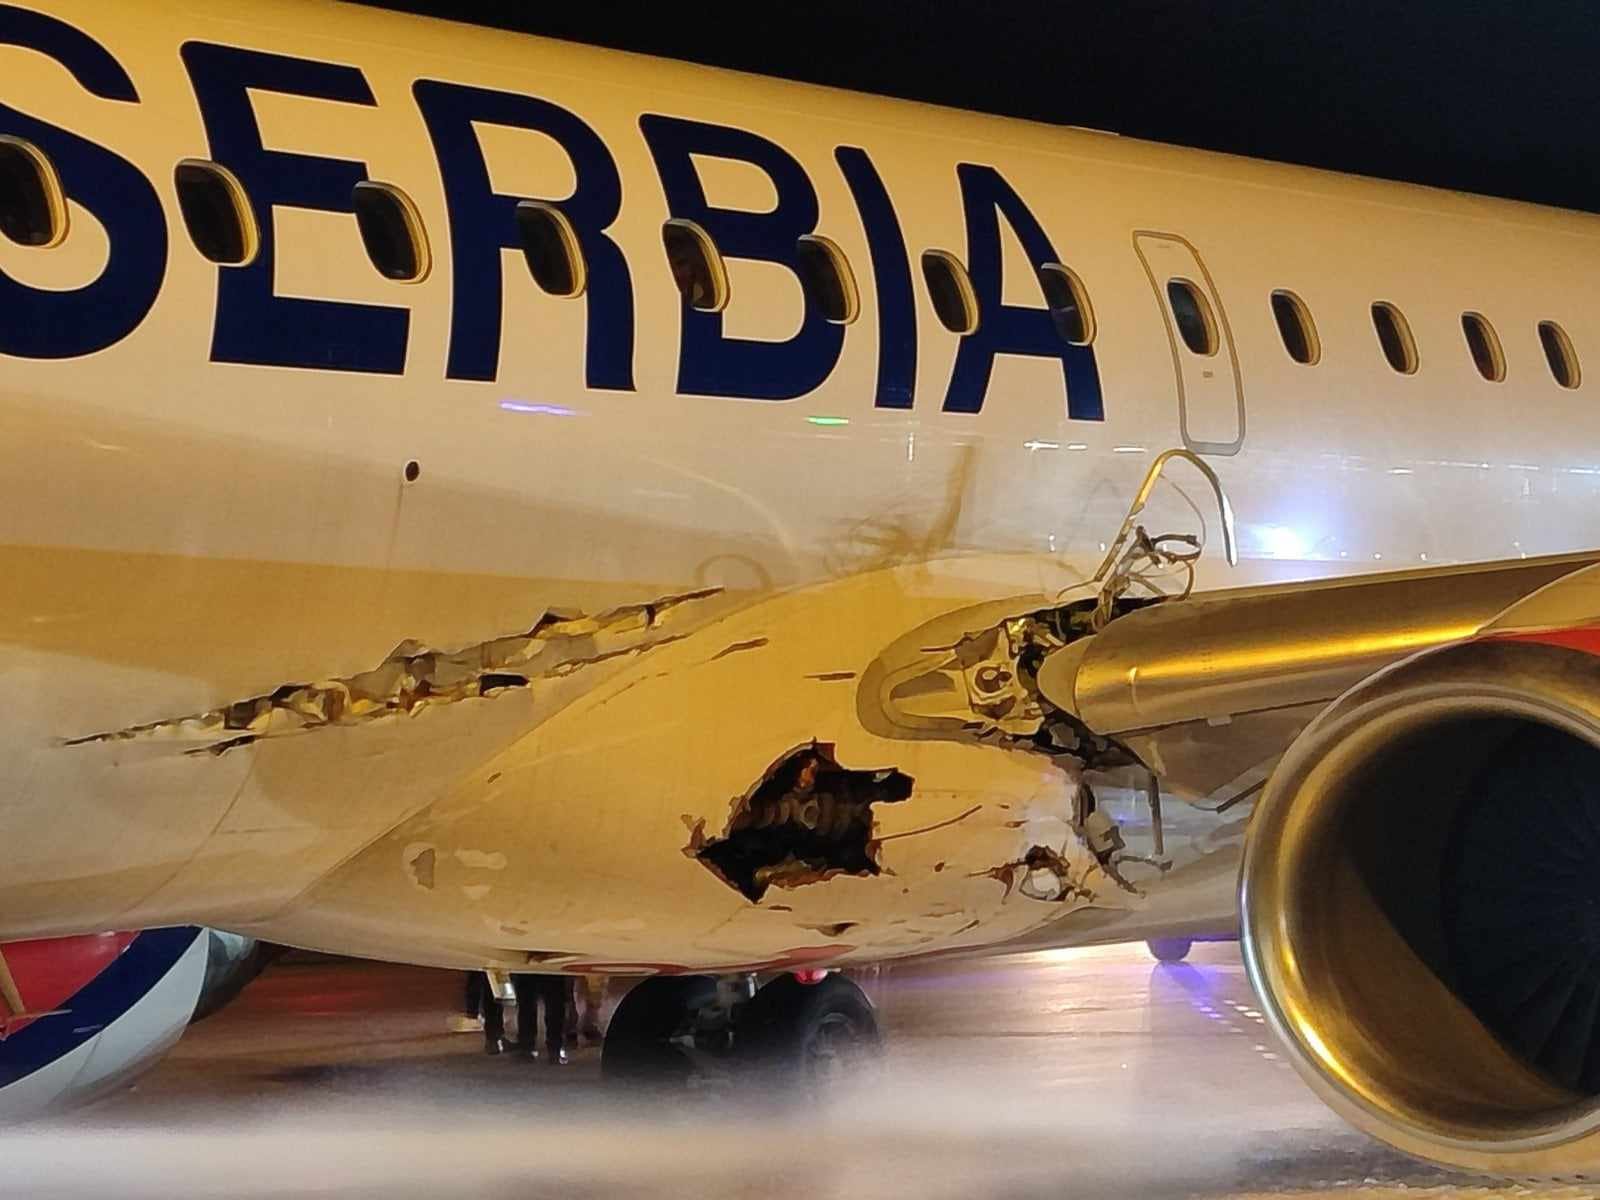 Terminating cooperation , Air Serbia  asked  Marathon Airlines  not  to  operate  flights  for  them  from  February 21, 2024